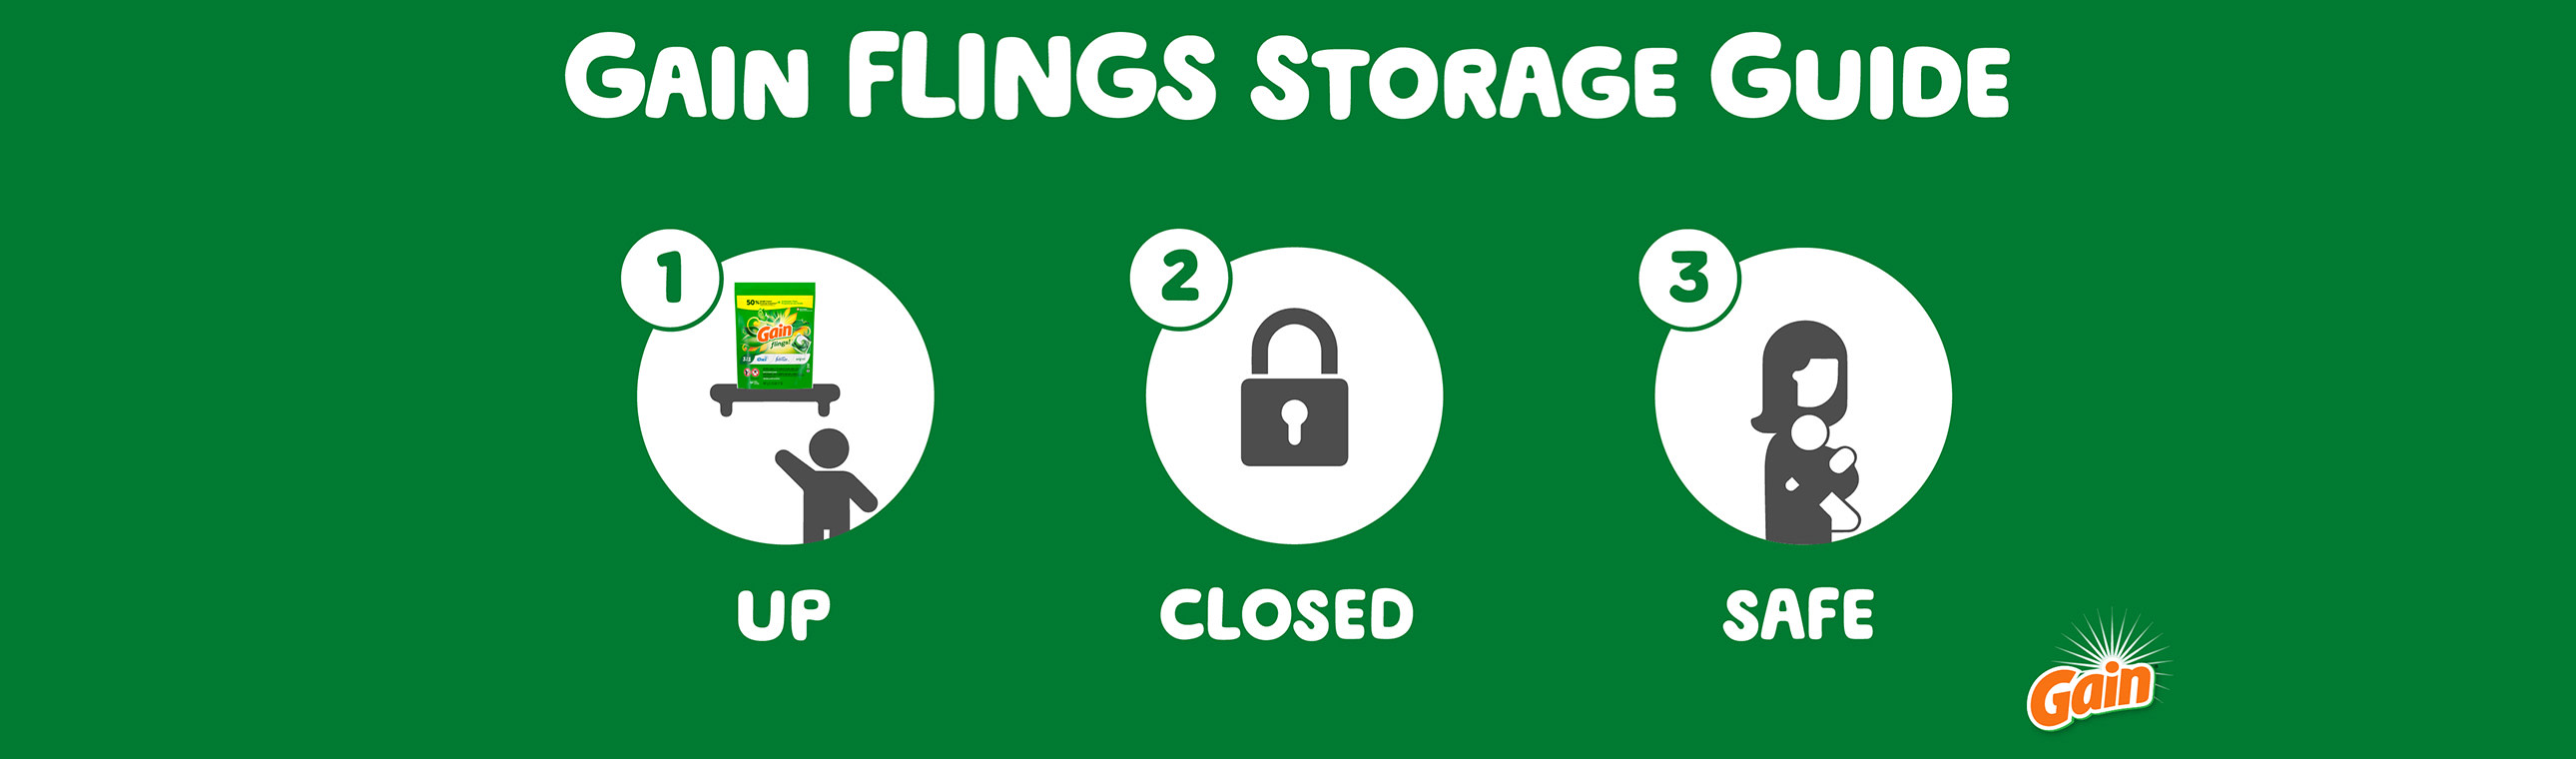 Gain Flings Storage Guide: store the product up, closed and safe – away from children